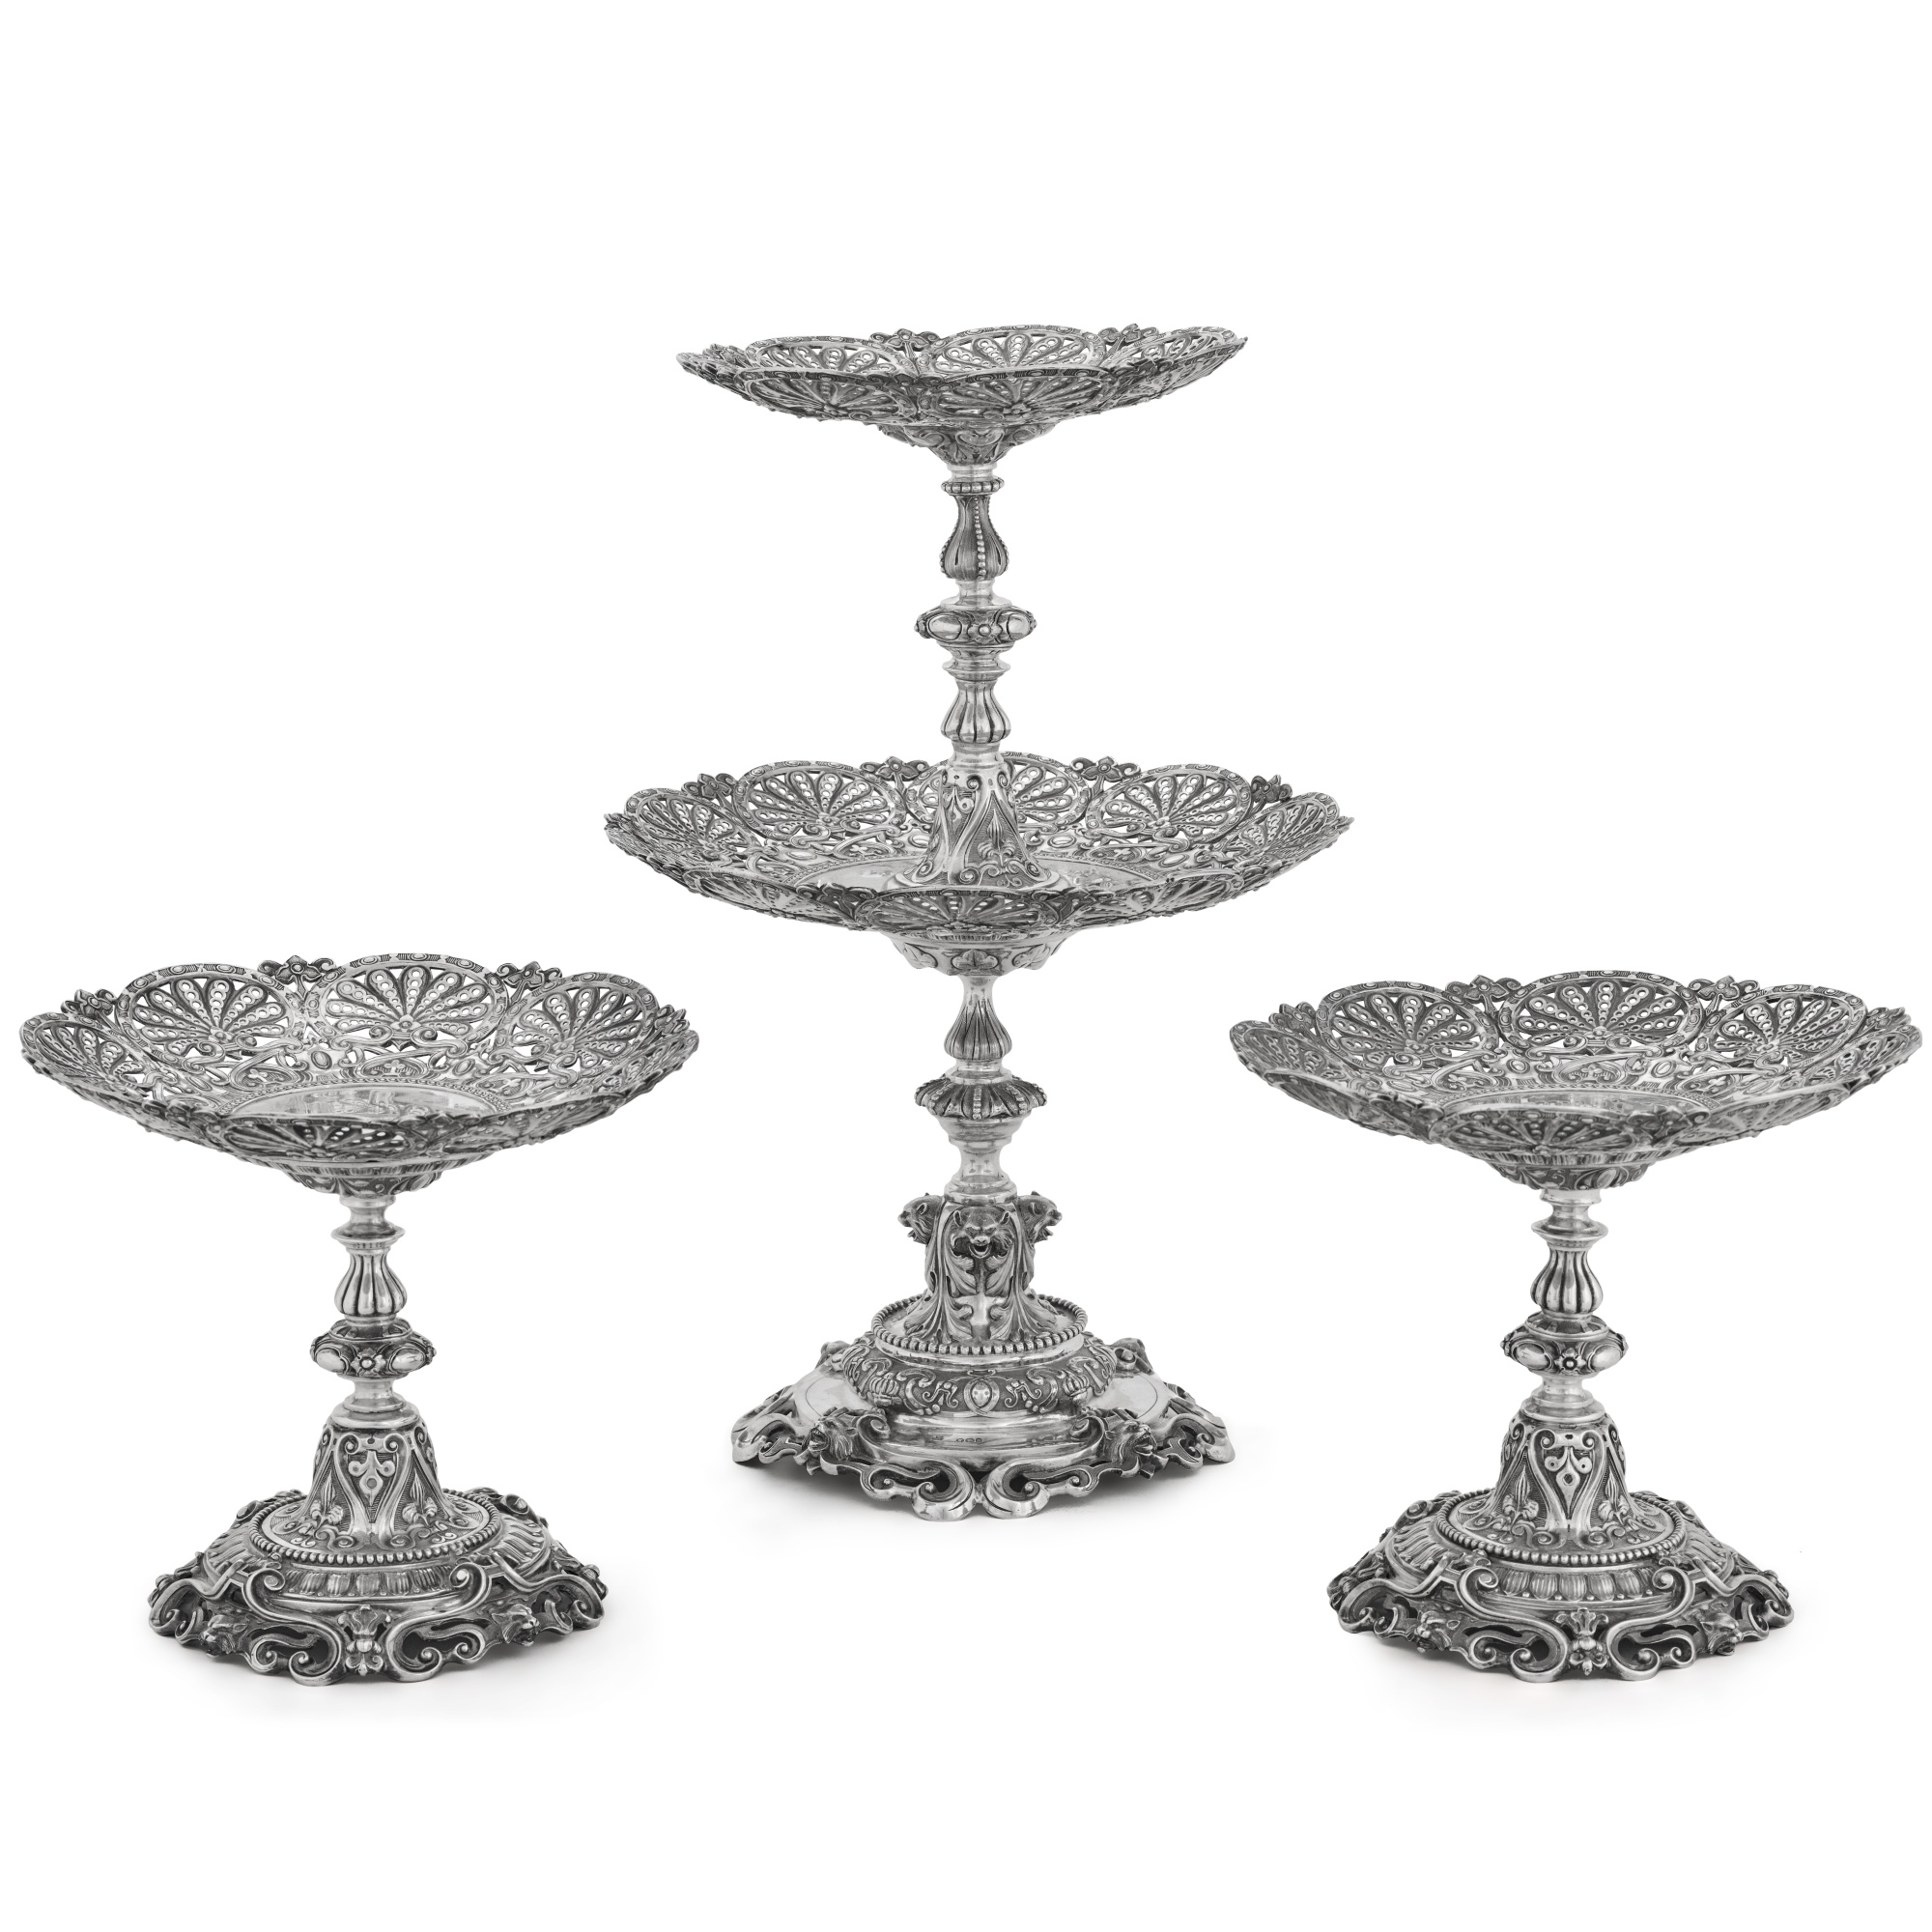 A suite of Victorian silver comports, Garrard & Co., London, 1862 - Image 3 of 5